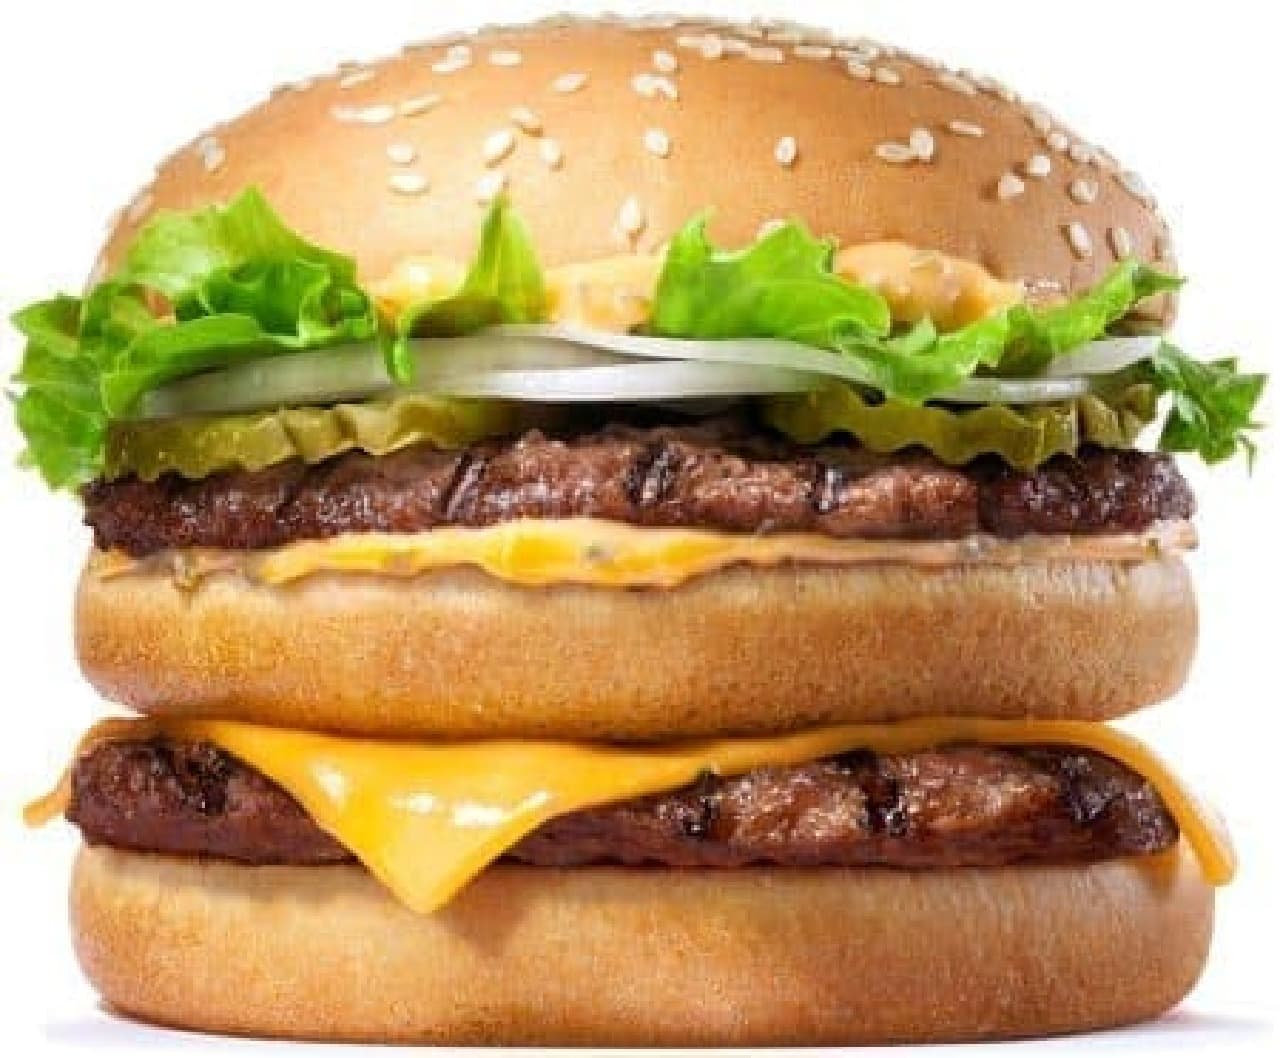 "BIG KING 4.0" with 3 buns and 2 layers